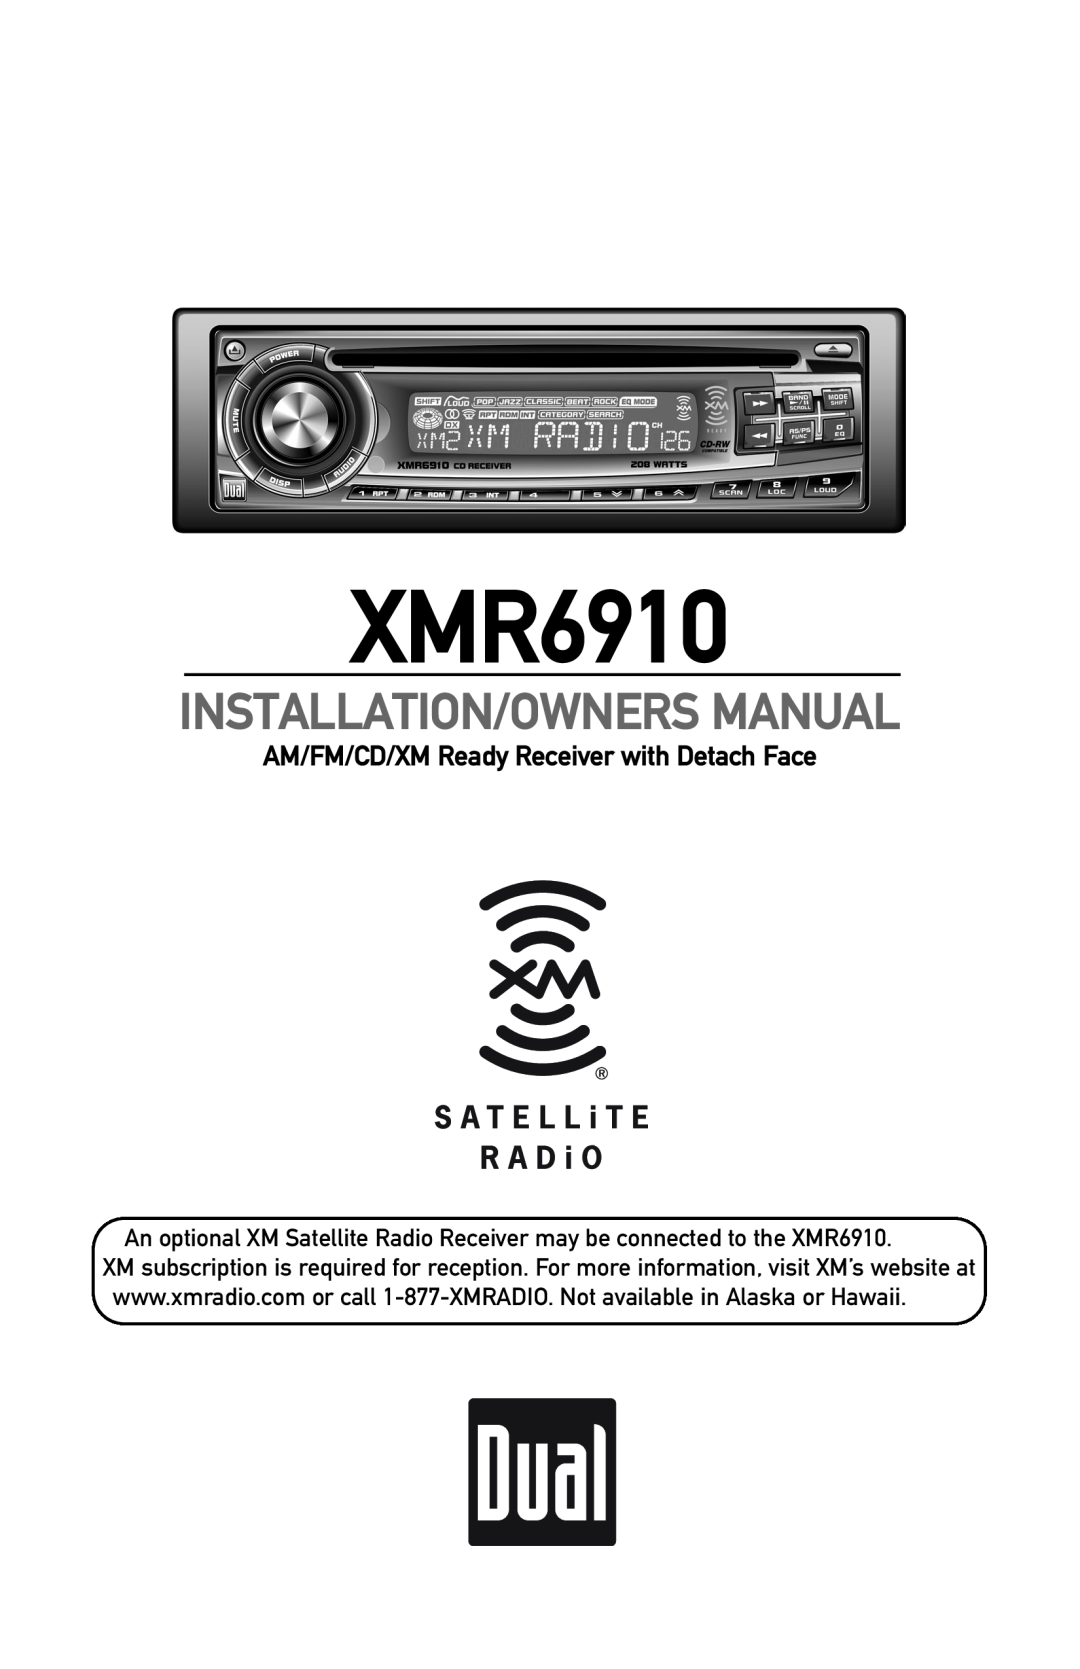 XM Satellite Radio XMR6910 owner manual AM/FM/CD/XM Ready Receiver with Detach Face, Installation/Owners Manual 